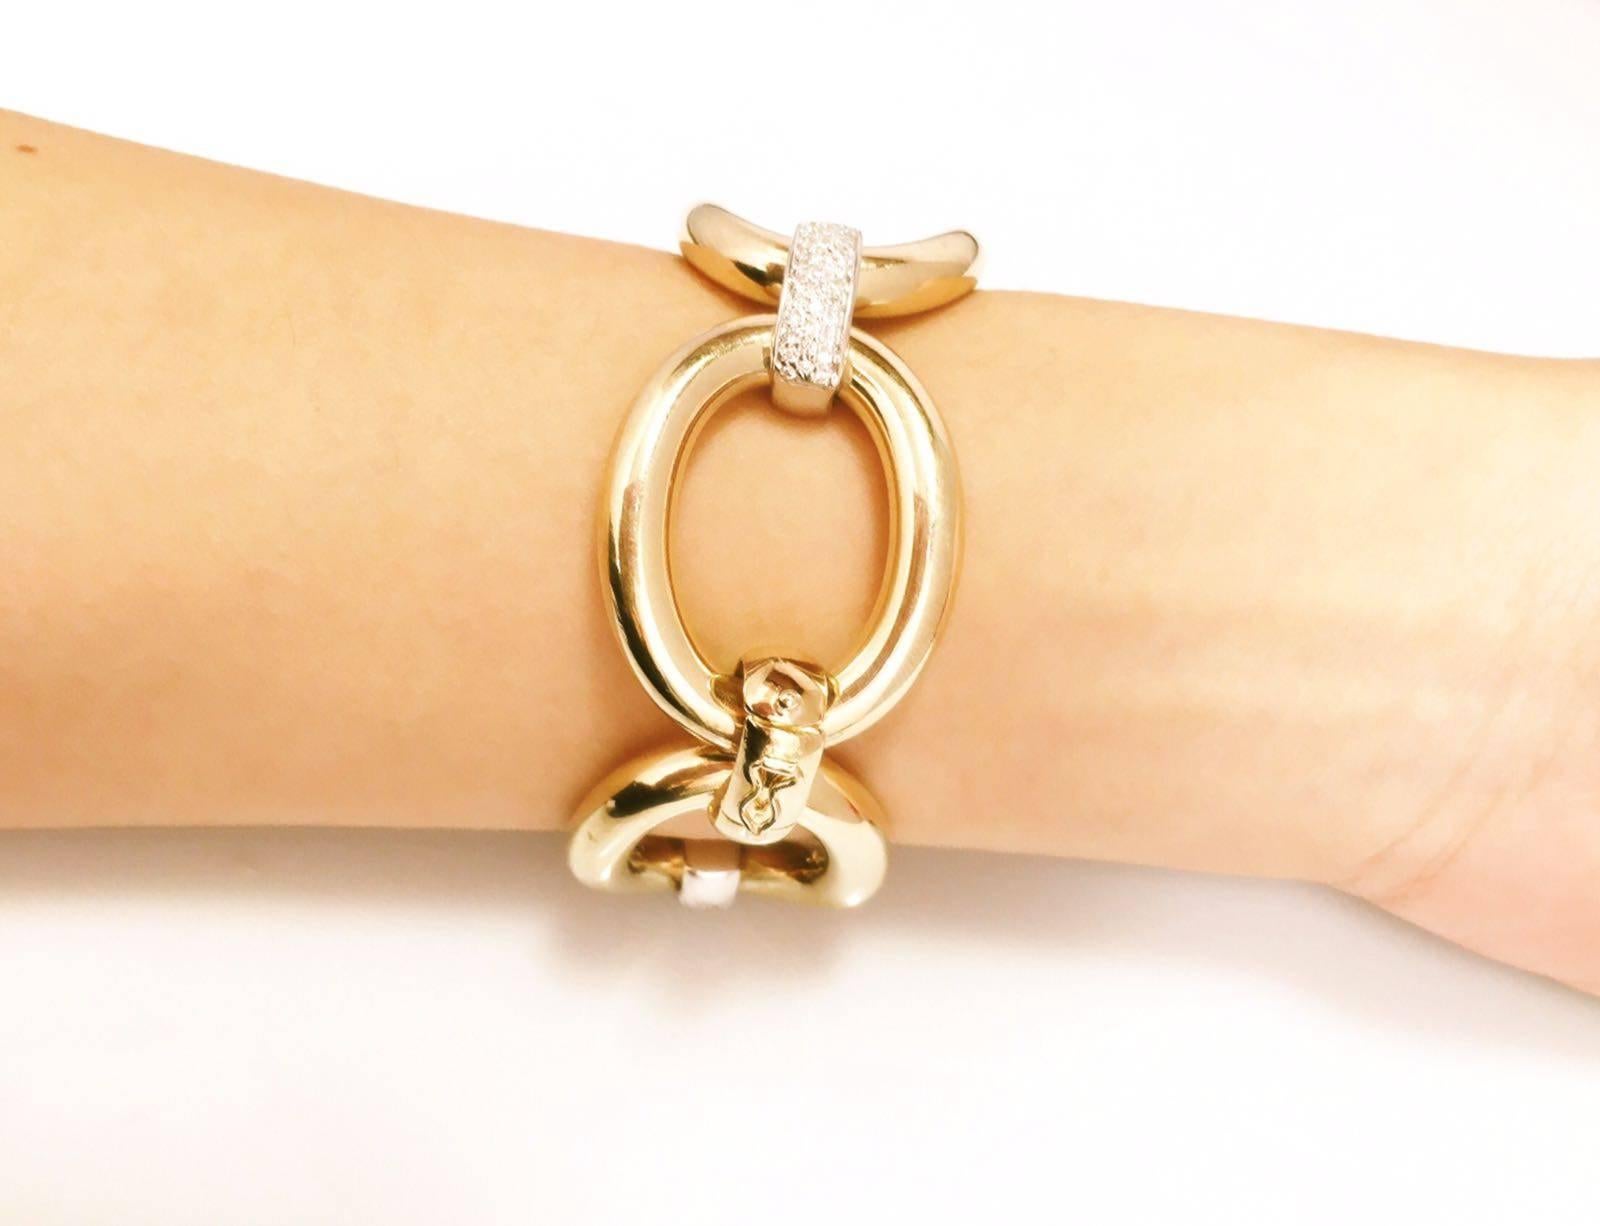 Feel the richness of this hand made bracelet the moment you put in on your wrist! Available for all wrist sizes. Based on a 7inch bracelet. This piece may be ordered in white/yellow/rose/black gold 14k/18k. 